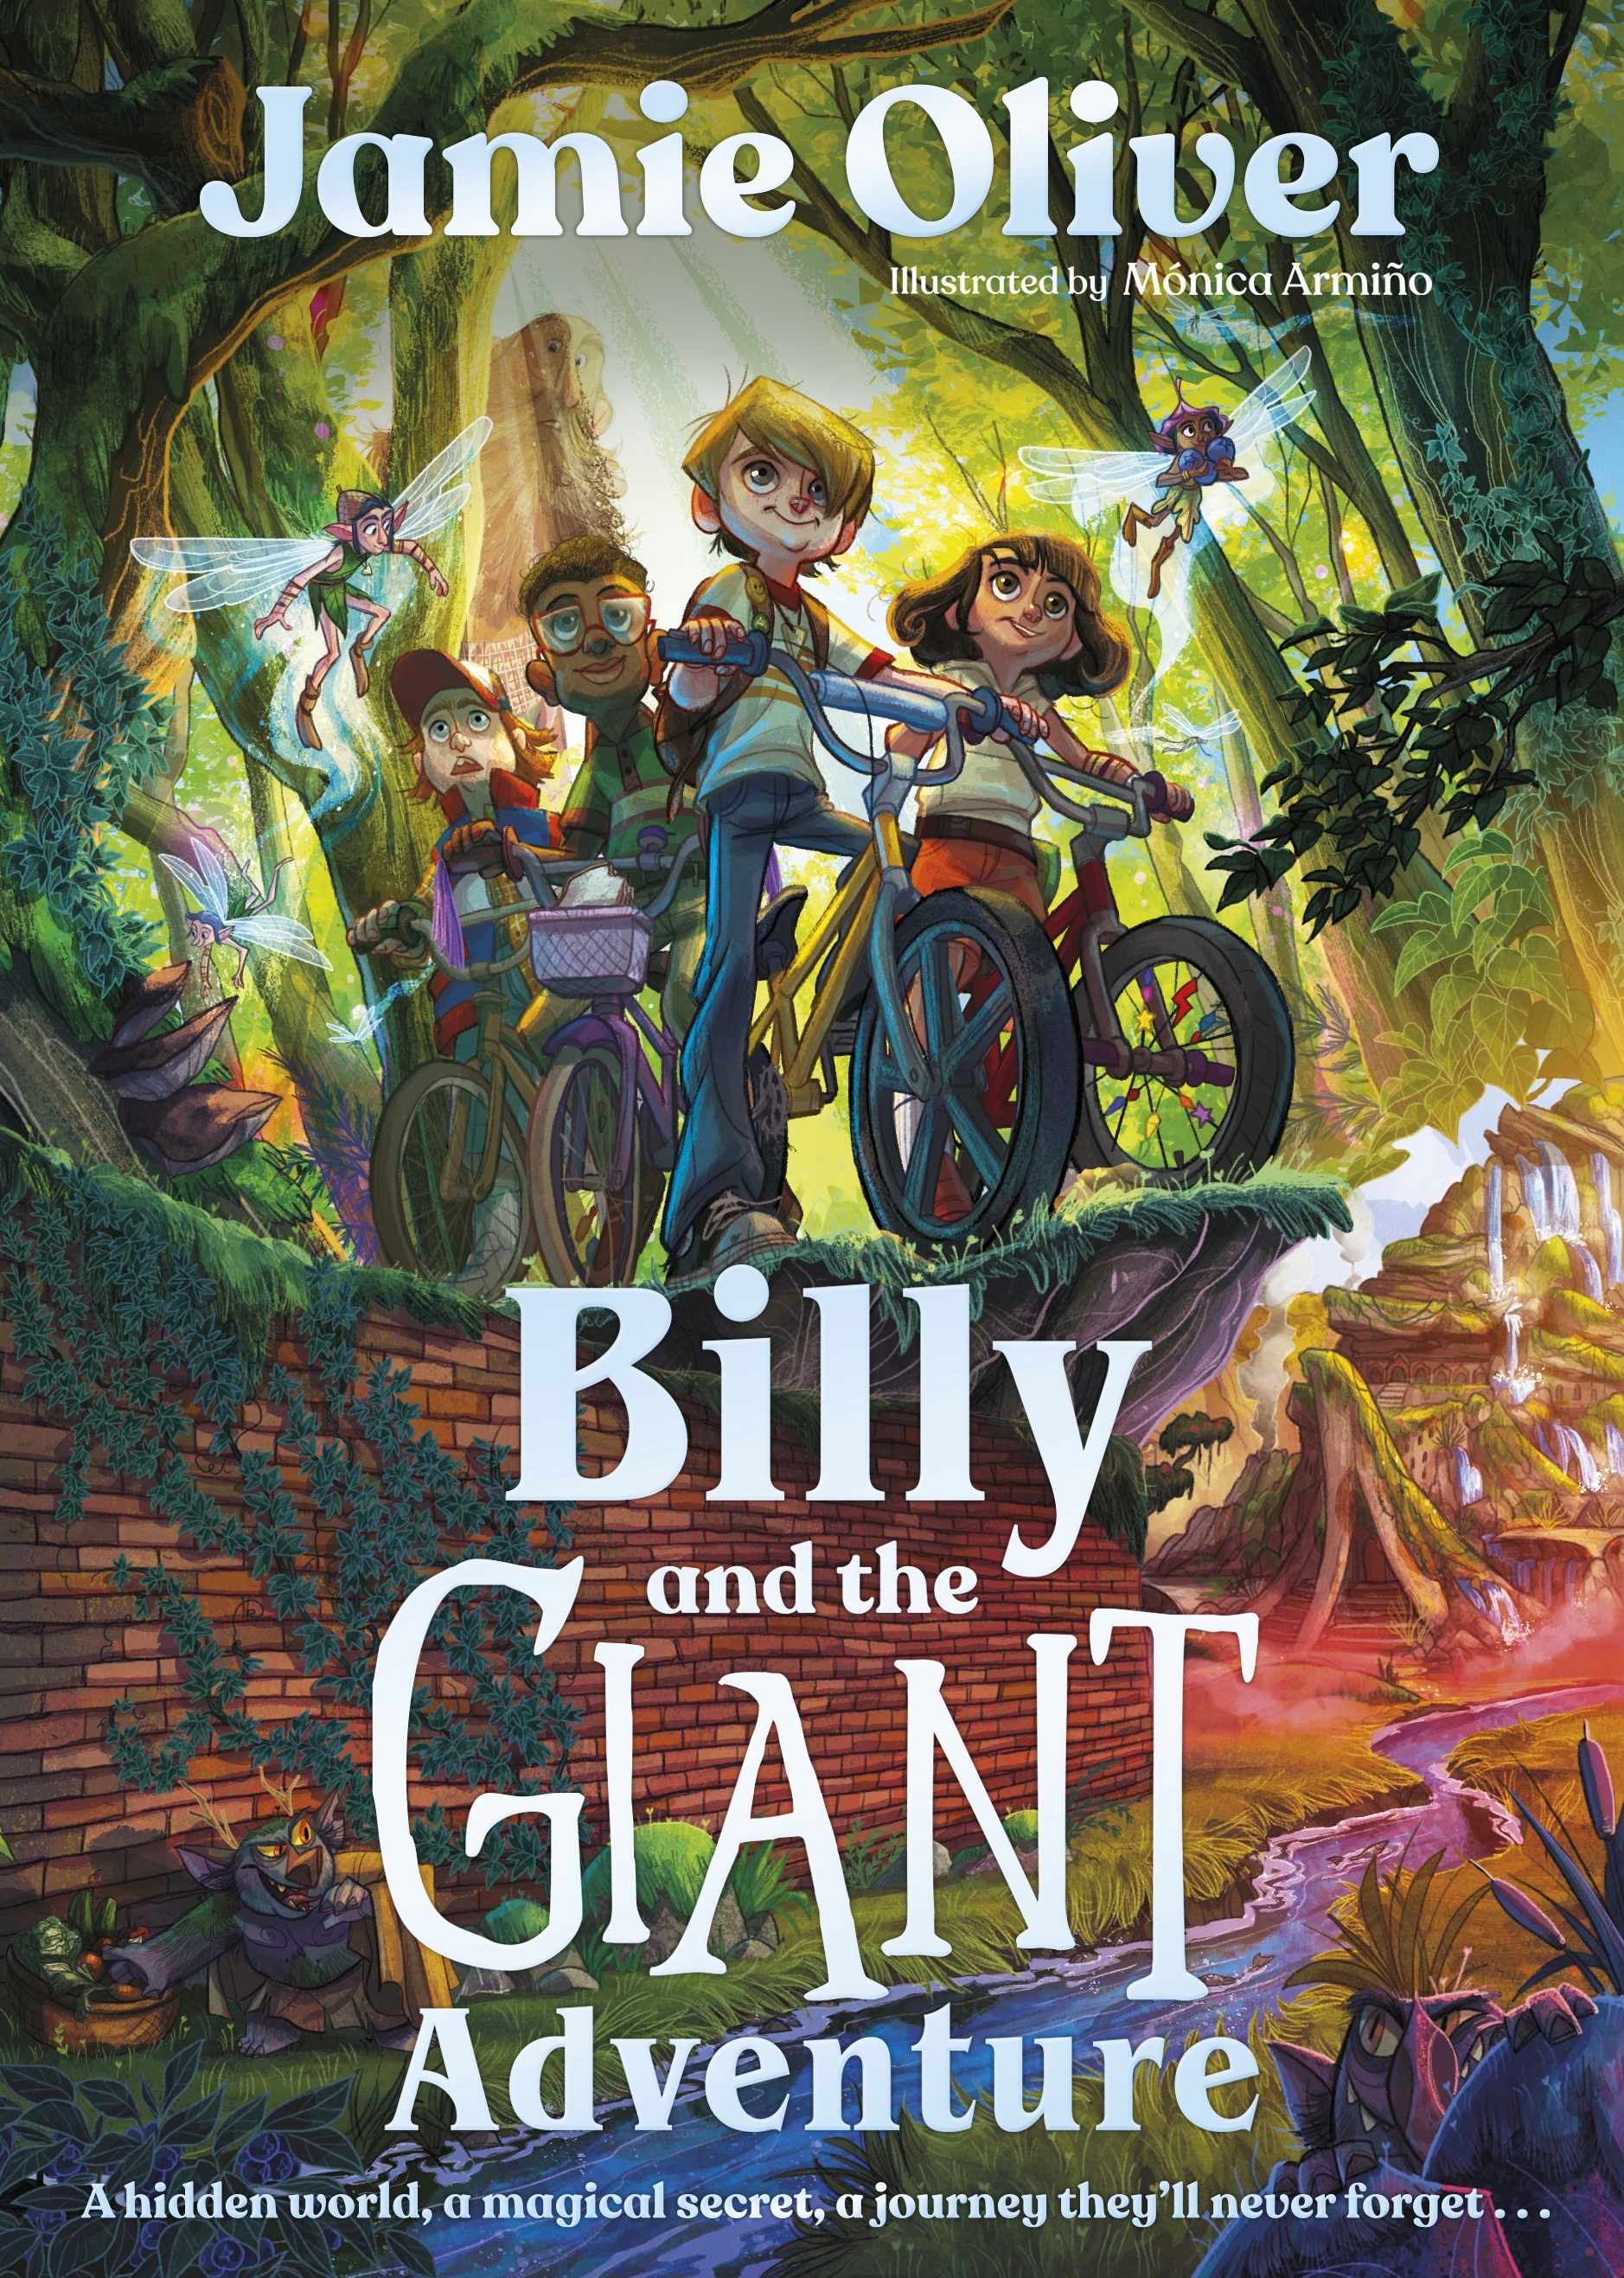 Billy and the Giant Adventure by Jamie Oliver - Penguin Books New Zealand